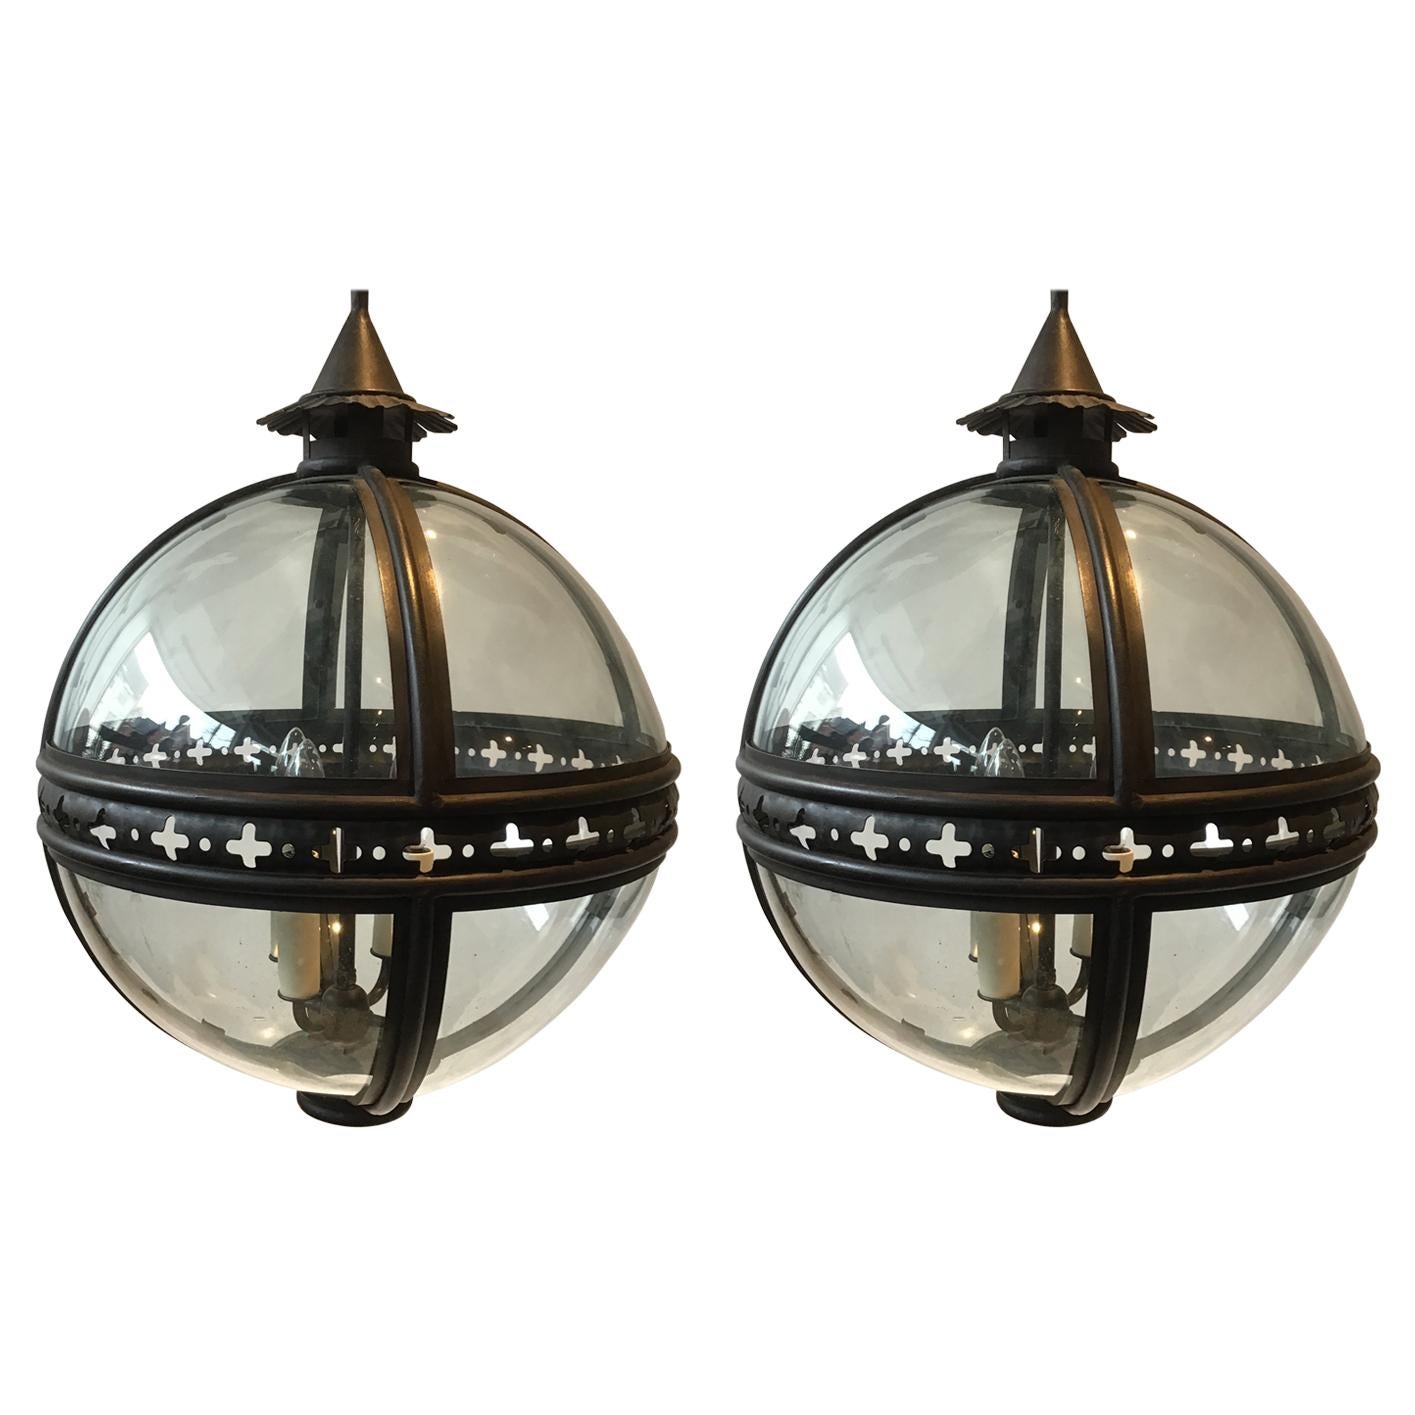 Pair of Paul Ferrante Iron and Glass Orb Chandeliers